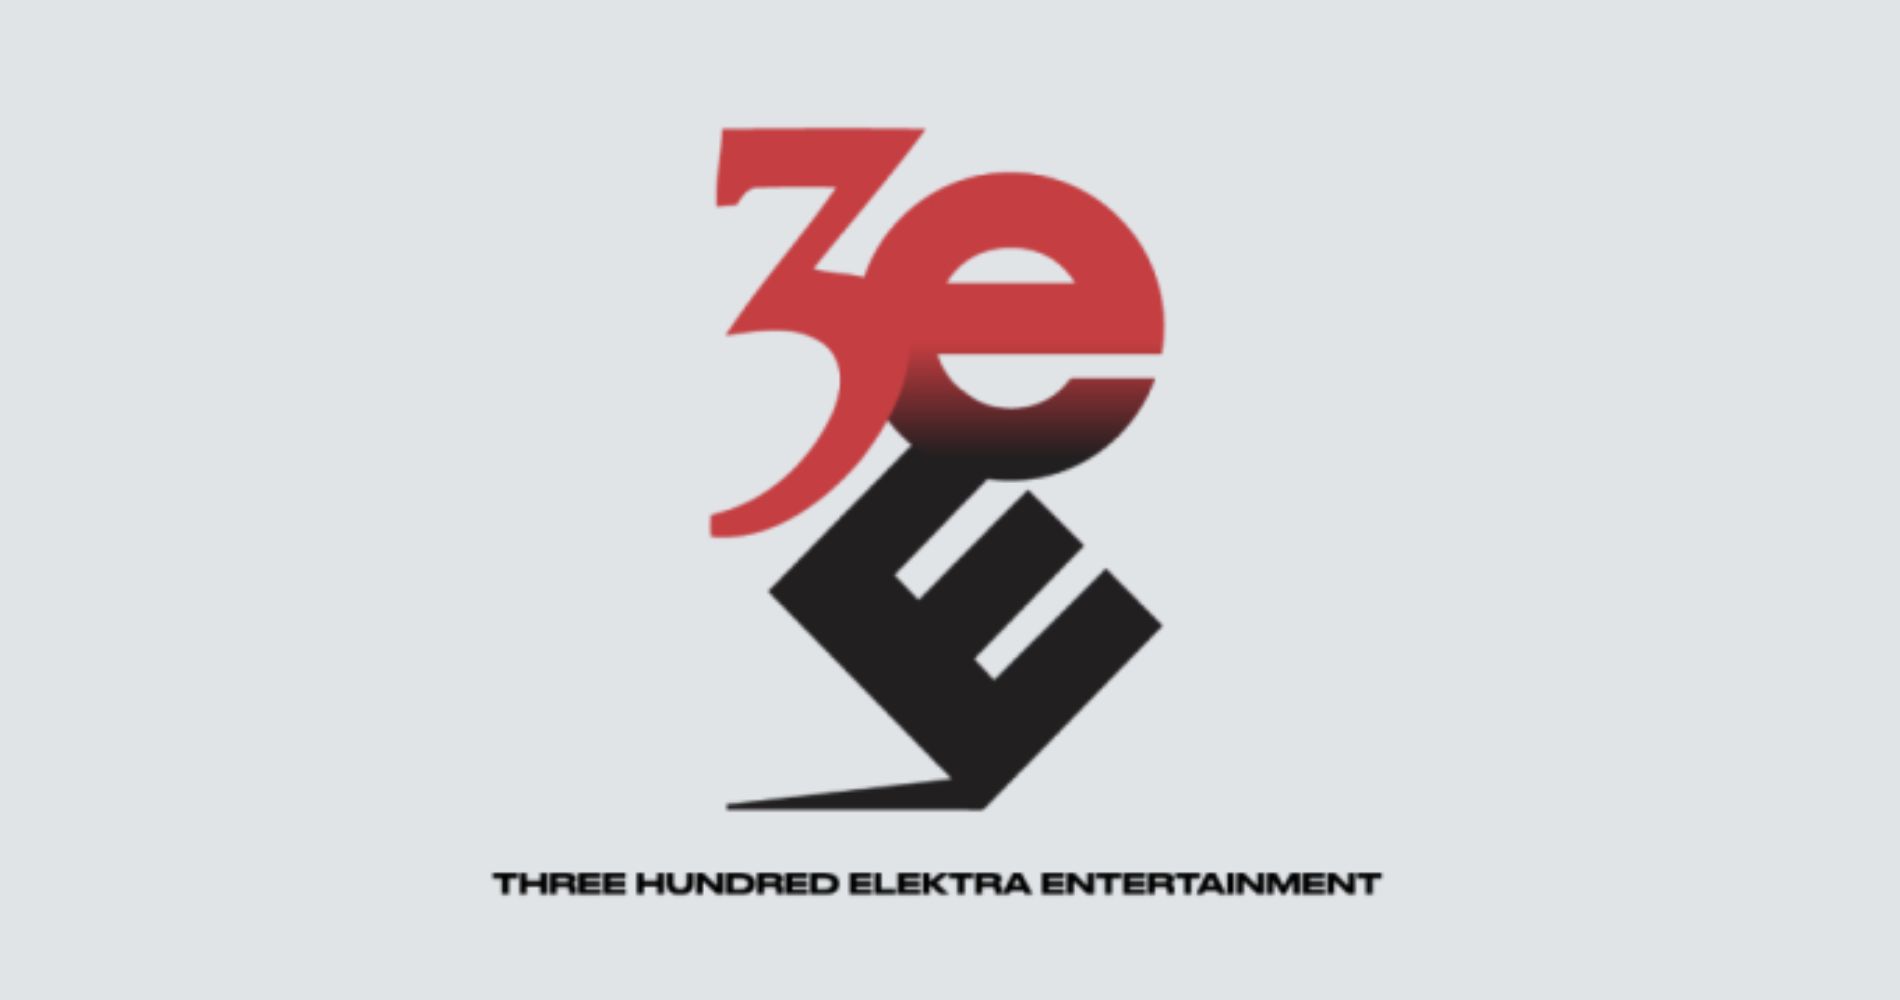 Warner Music Group has announced the creation of 300 Elektra